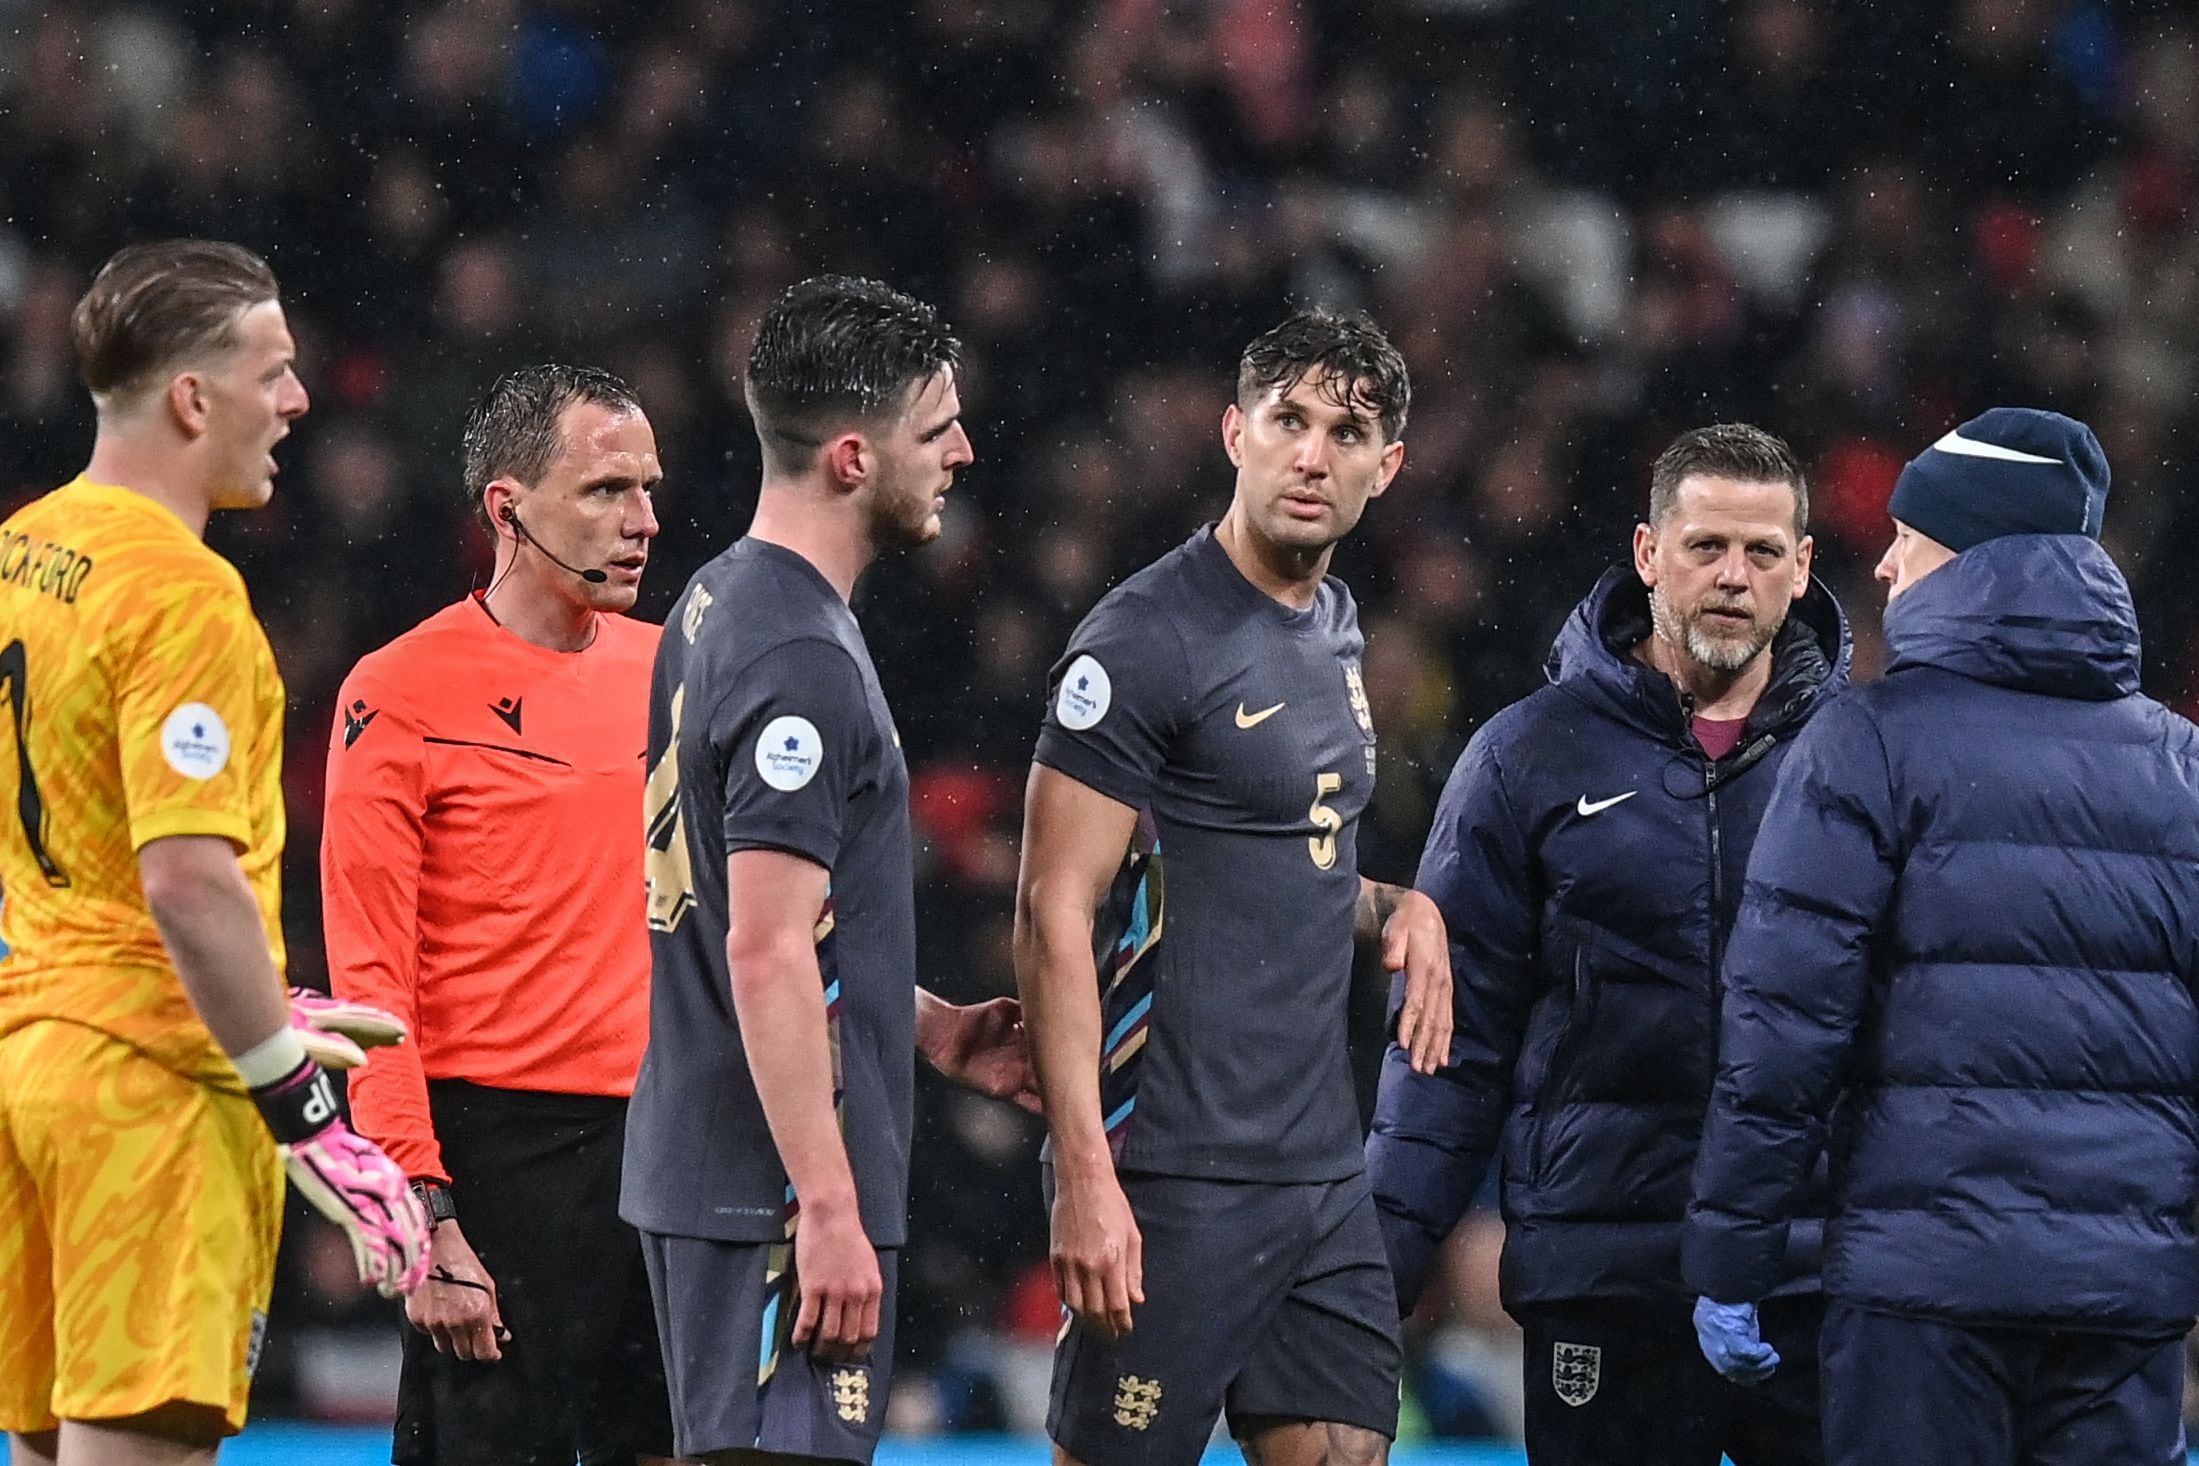 England's defender #05 John Stones leaves the pitch after being injured during the International friendly football match between England and Belgium at Wembley stadium, in London, on March 26, 2024. (Photo by Glyn KIRK / AFP) / NOT FOR MARKETING OR ADVERTISING USE / RESTRICTED TO EDITORIAL USE